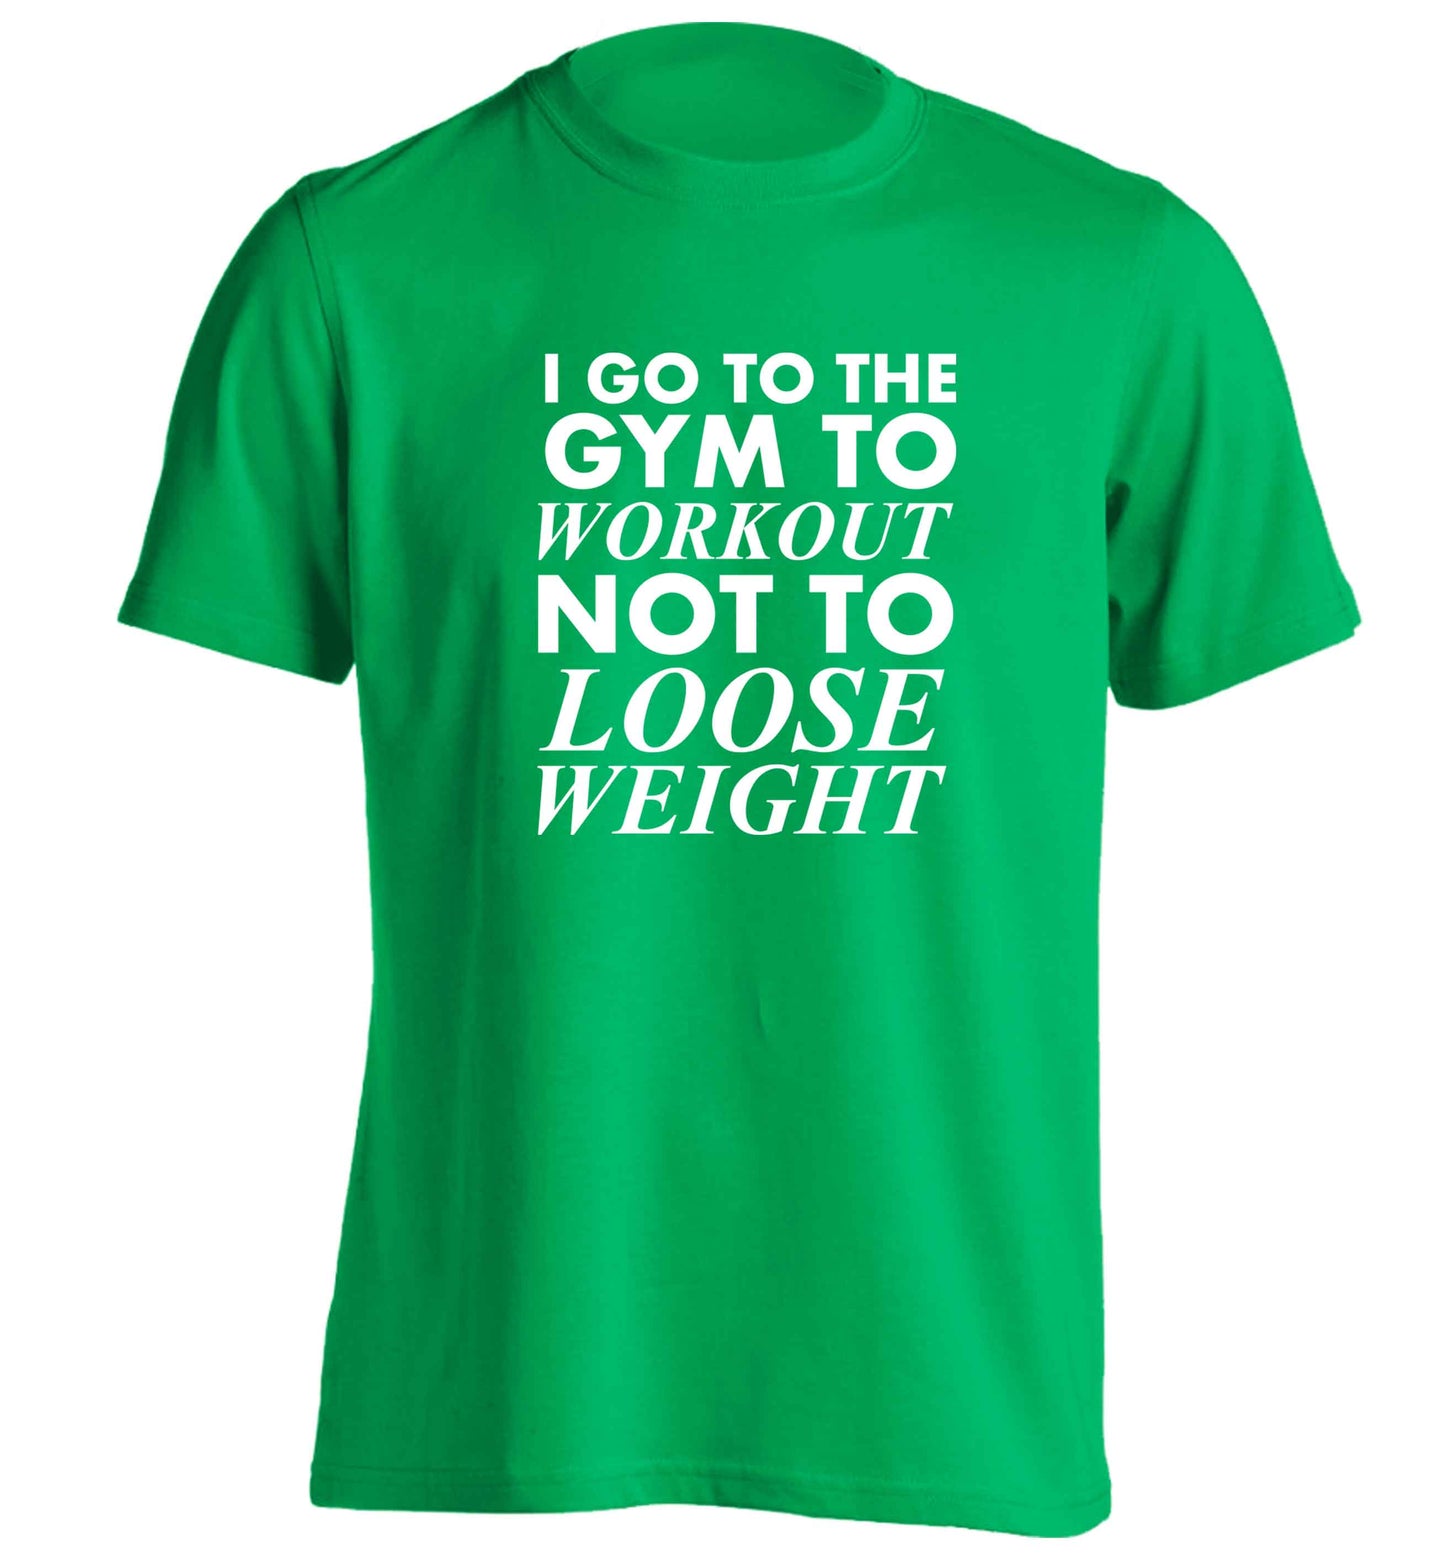 I go to the gym to workout not to loose weight adults unisex green Tshirt 2XL